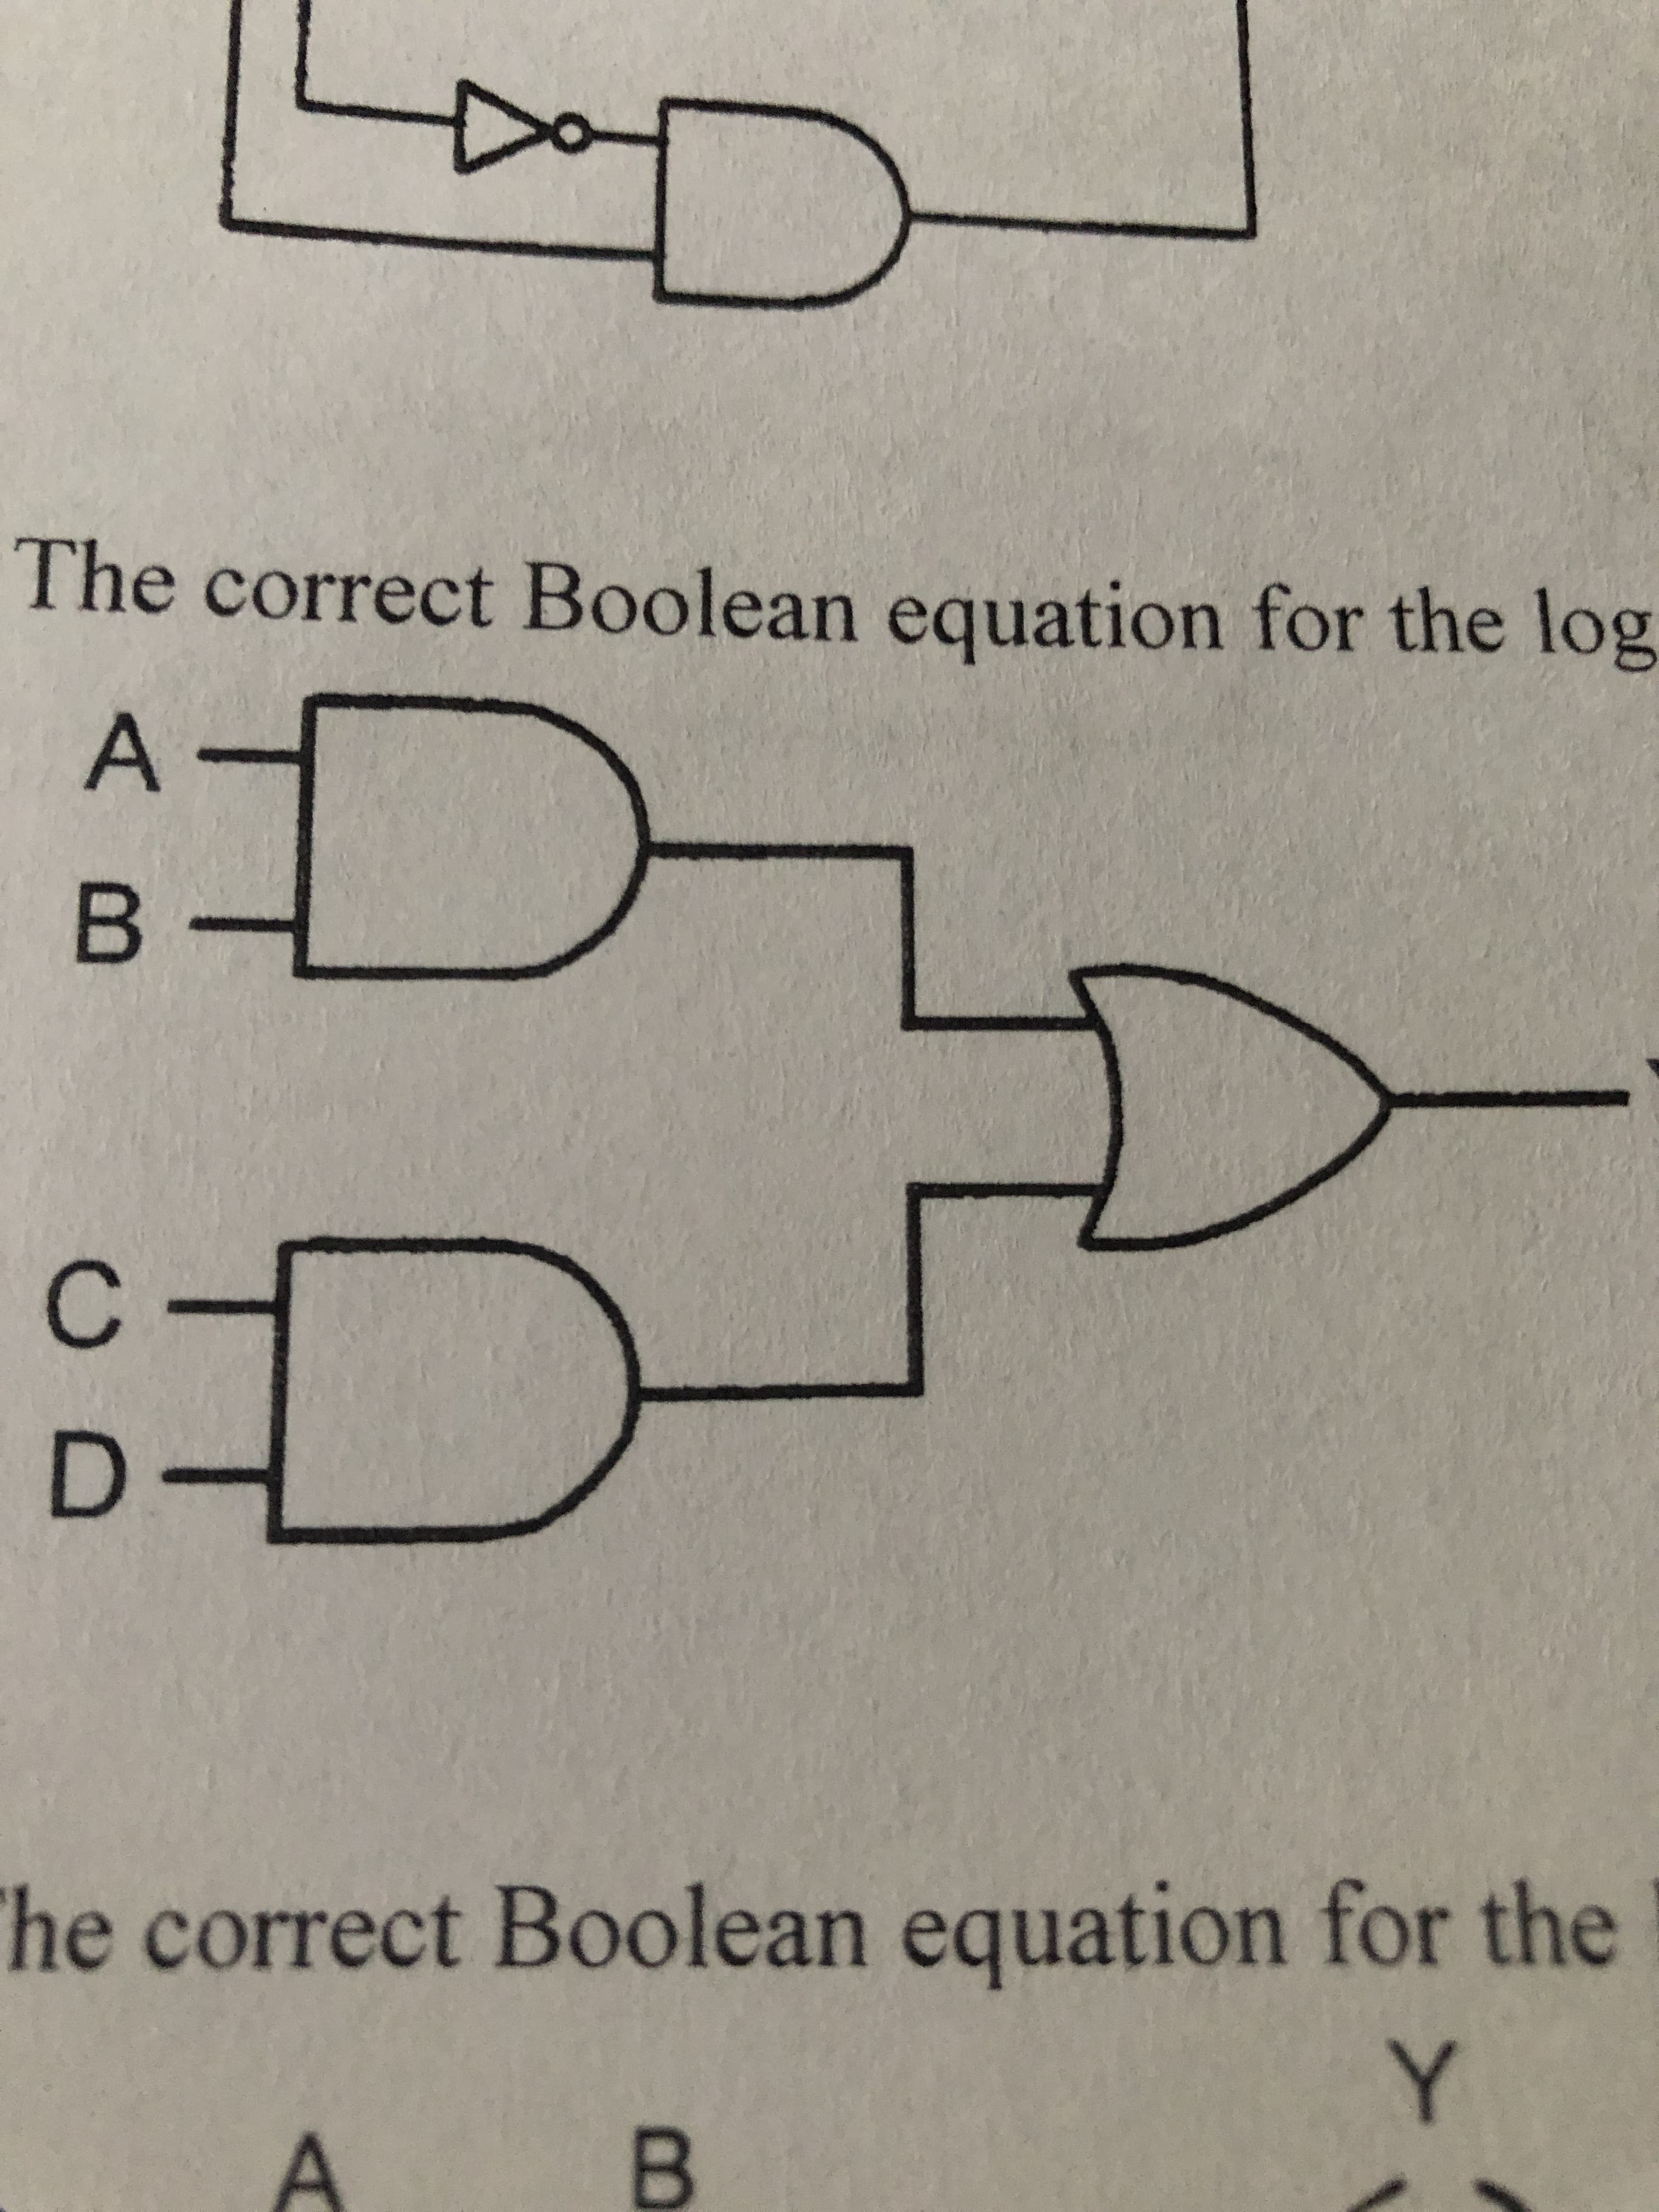 he correct Boolean equation for the
C.
1)
A-
The correct Boolean equation for the log
